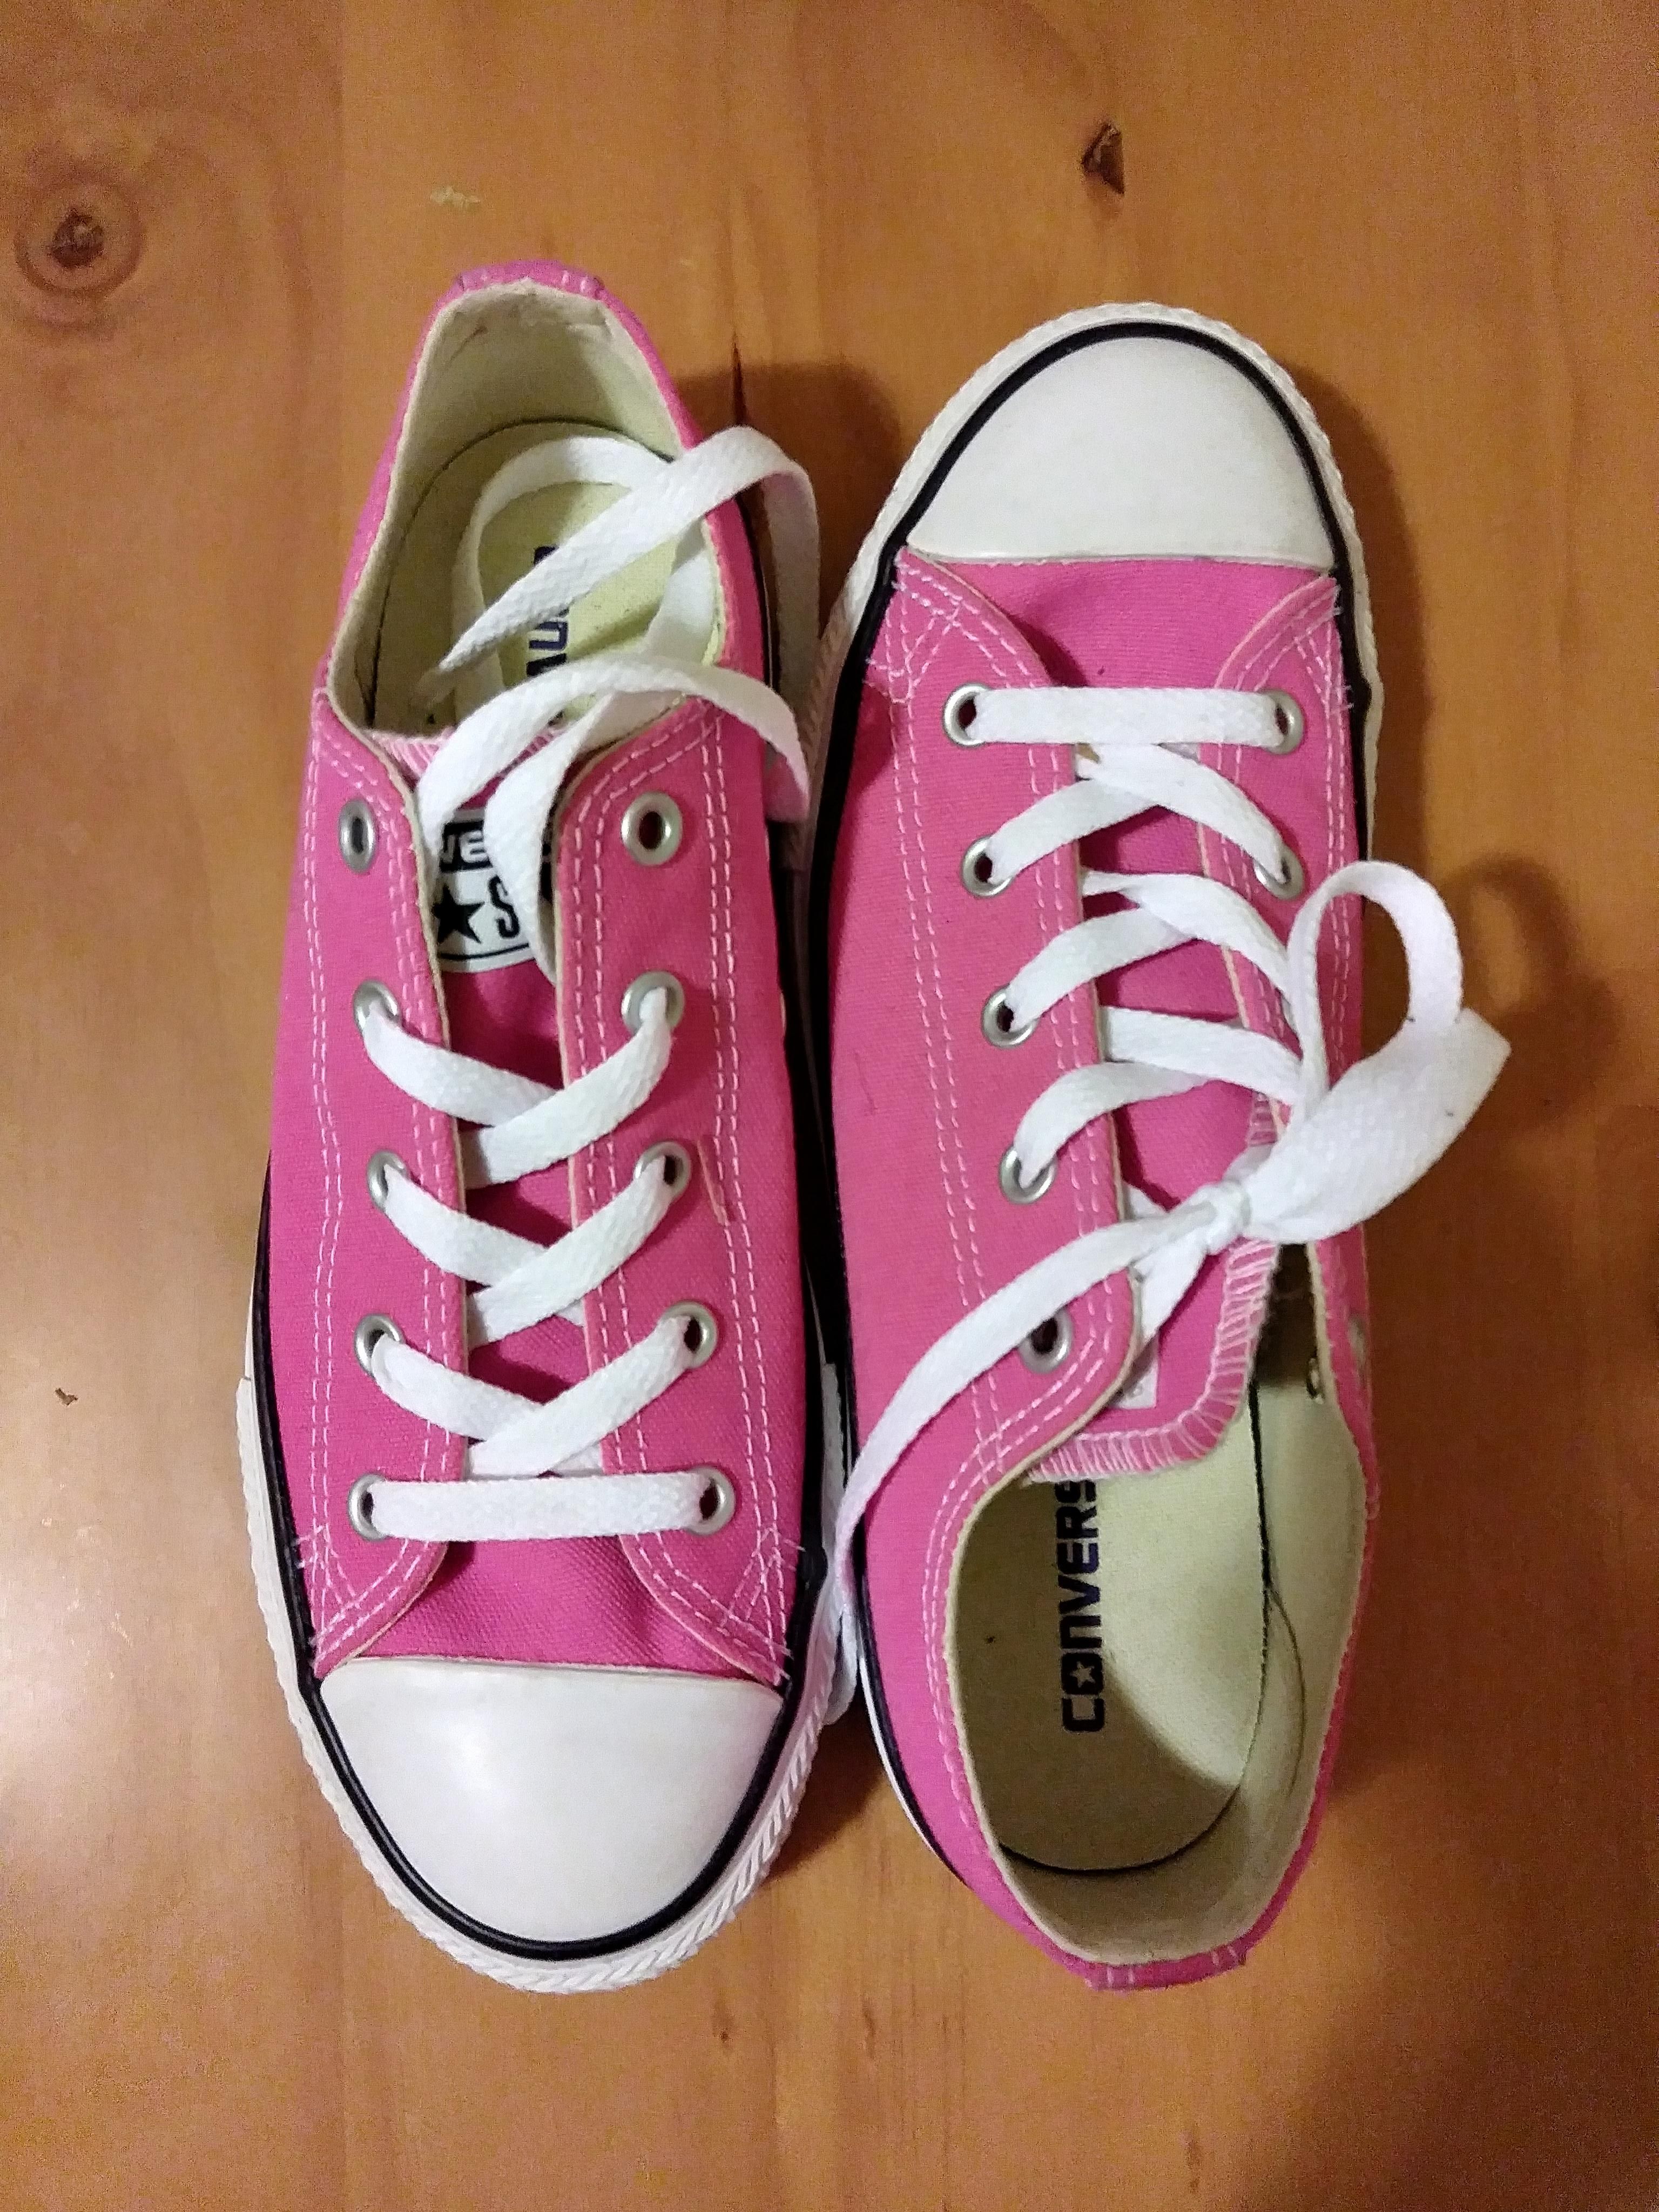 New in box pink converse size 3